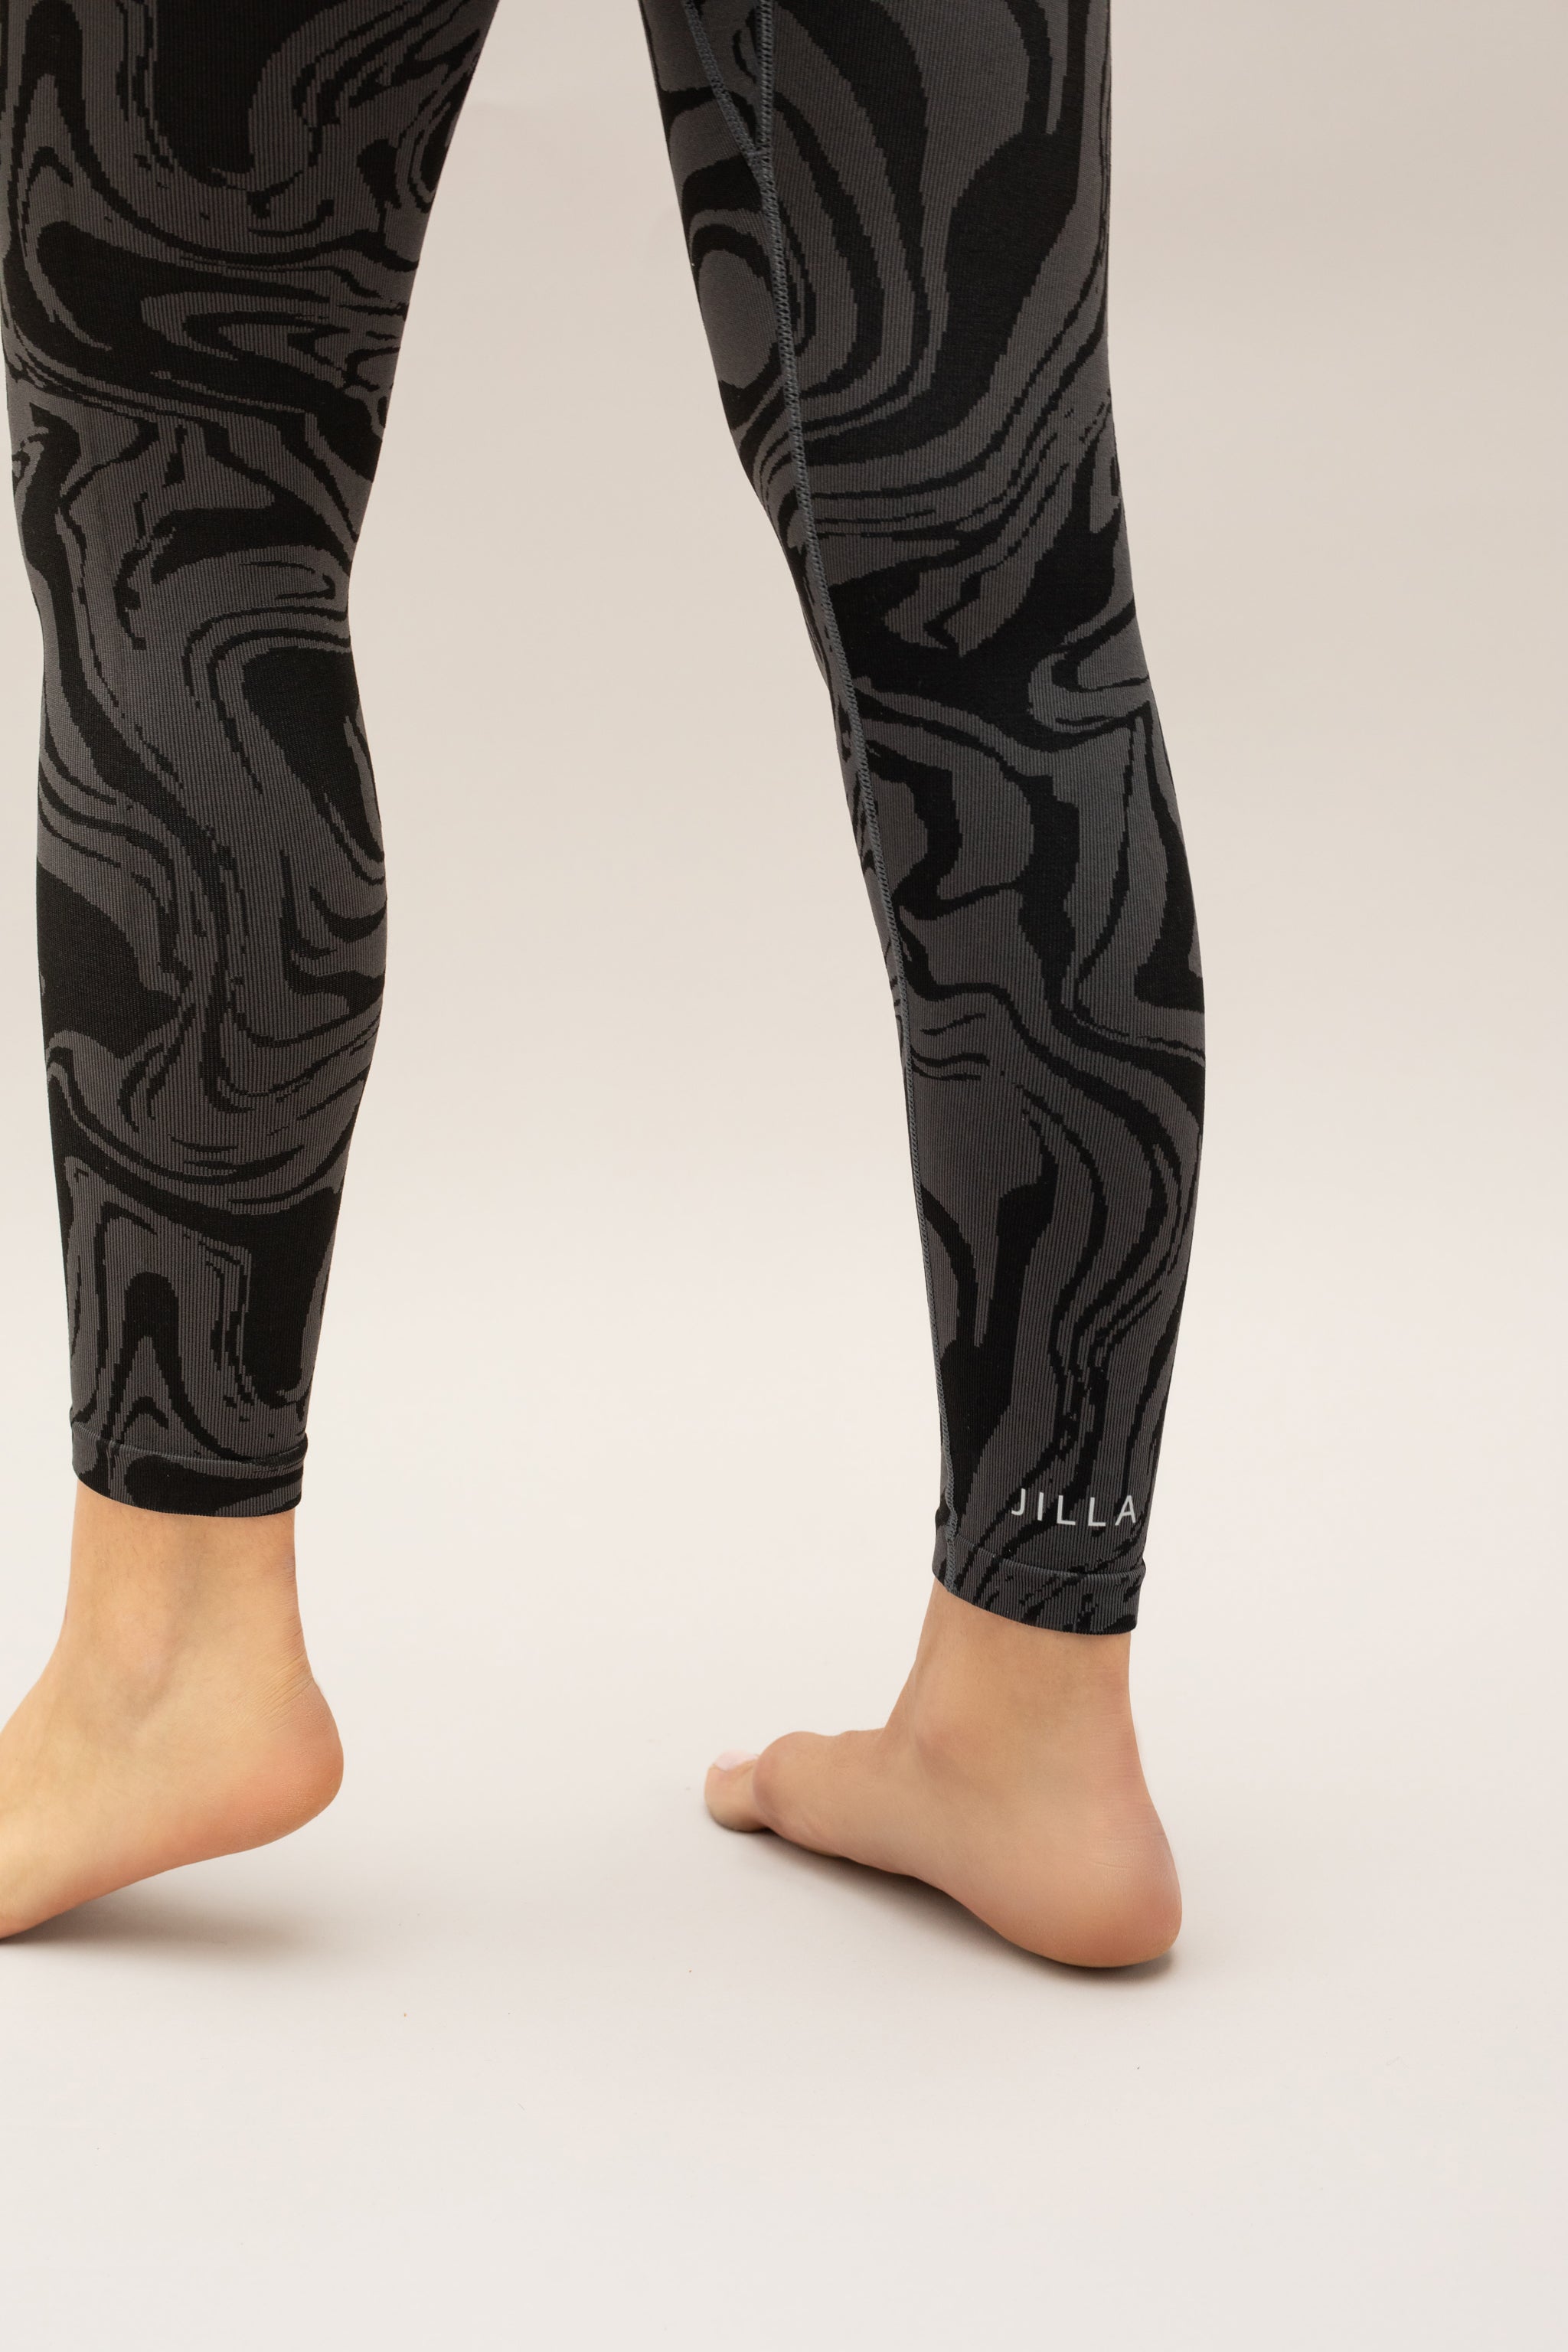 Black grey charcoal recycled seamless marble jacquard print full length high rise sculpting compressive leggings for yoga, pilates, barre, spinning, running, cycling and exercise by sustainable activewear brand Jilla Active